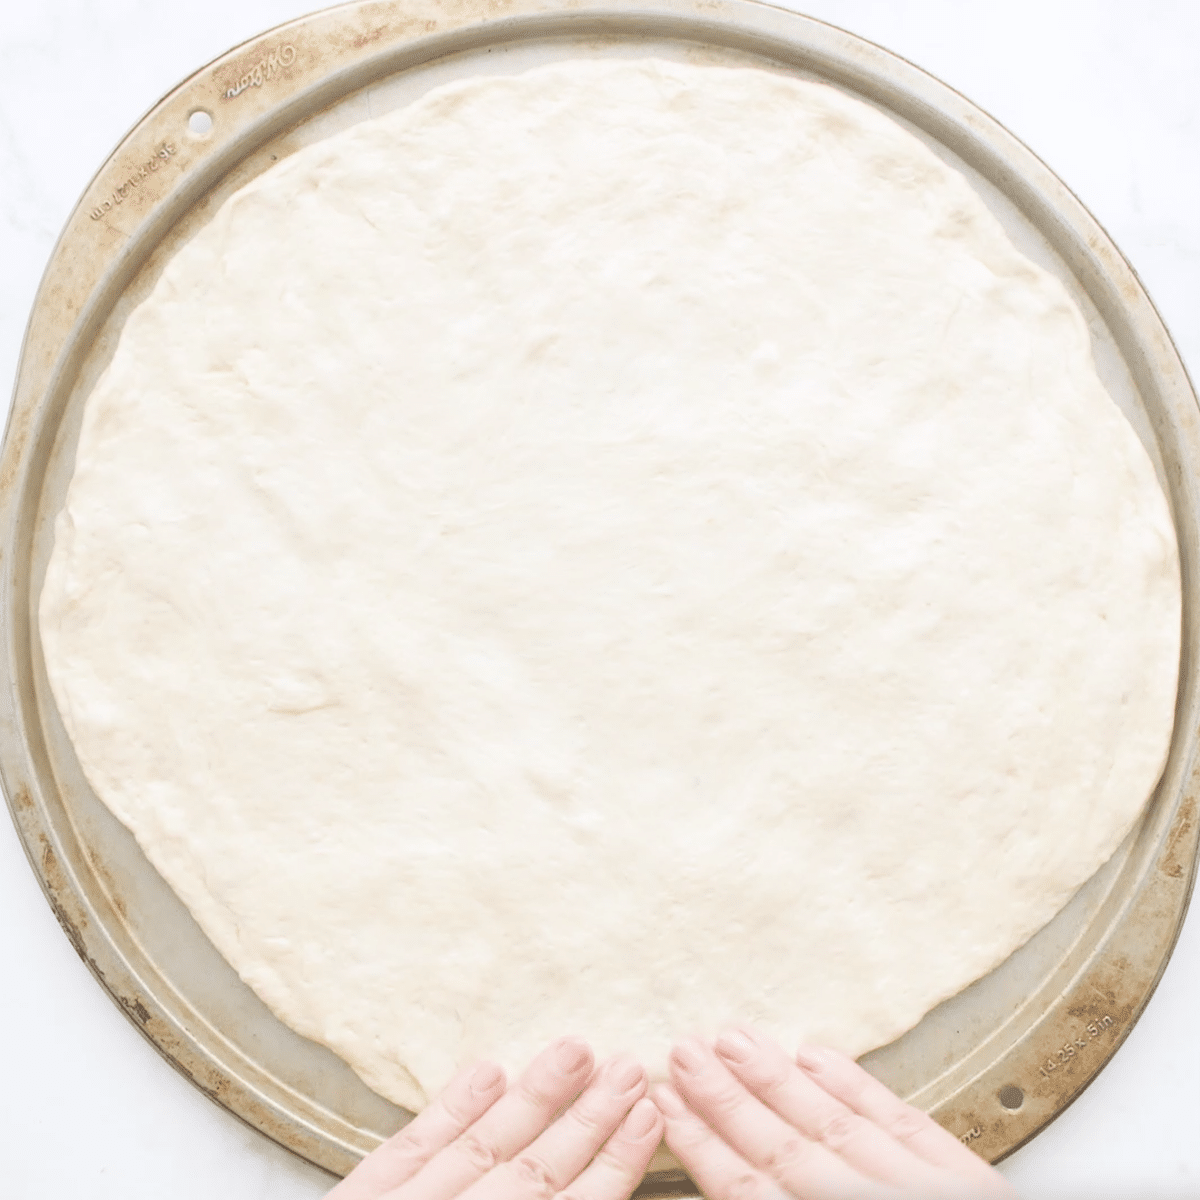 Dough in the shape of a pizza on a pizza stone.